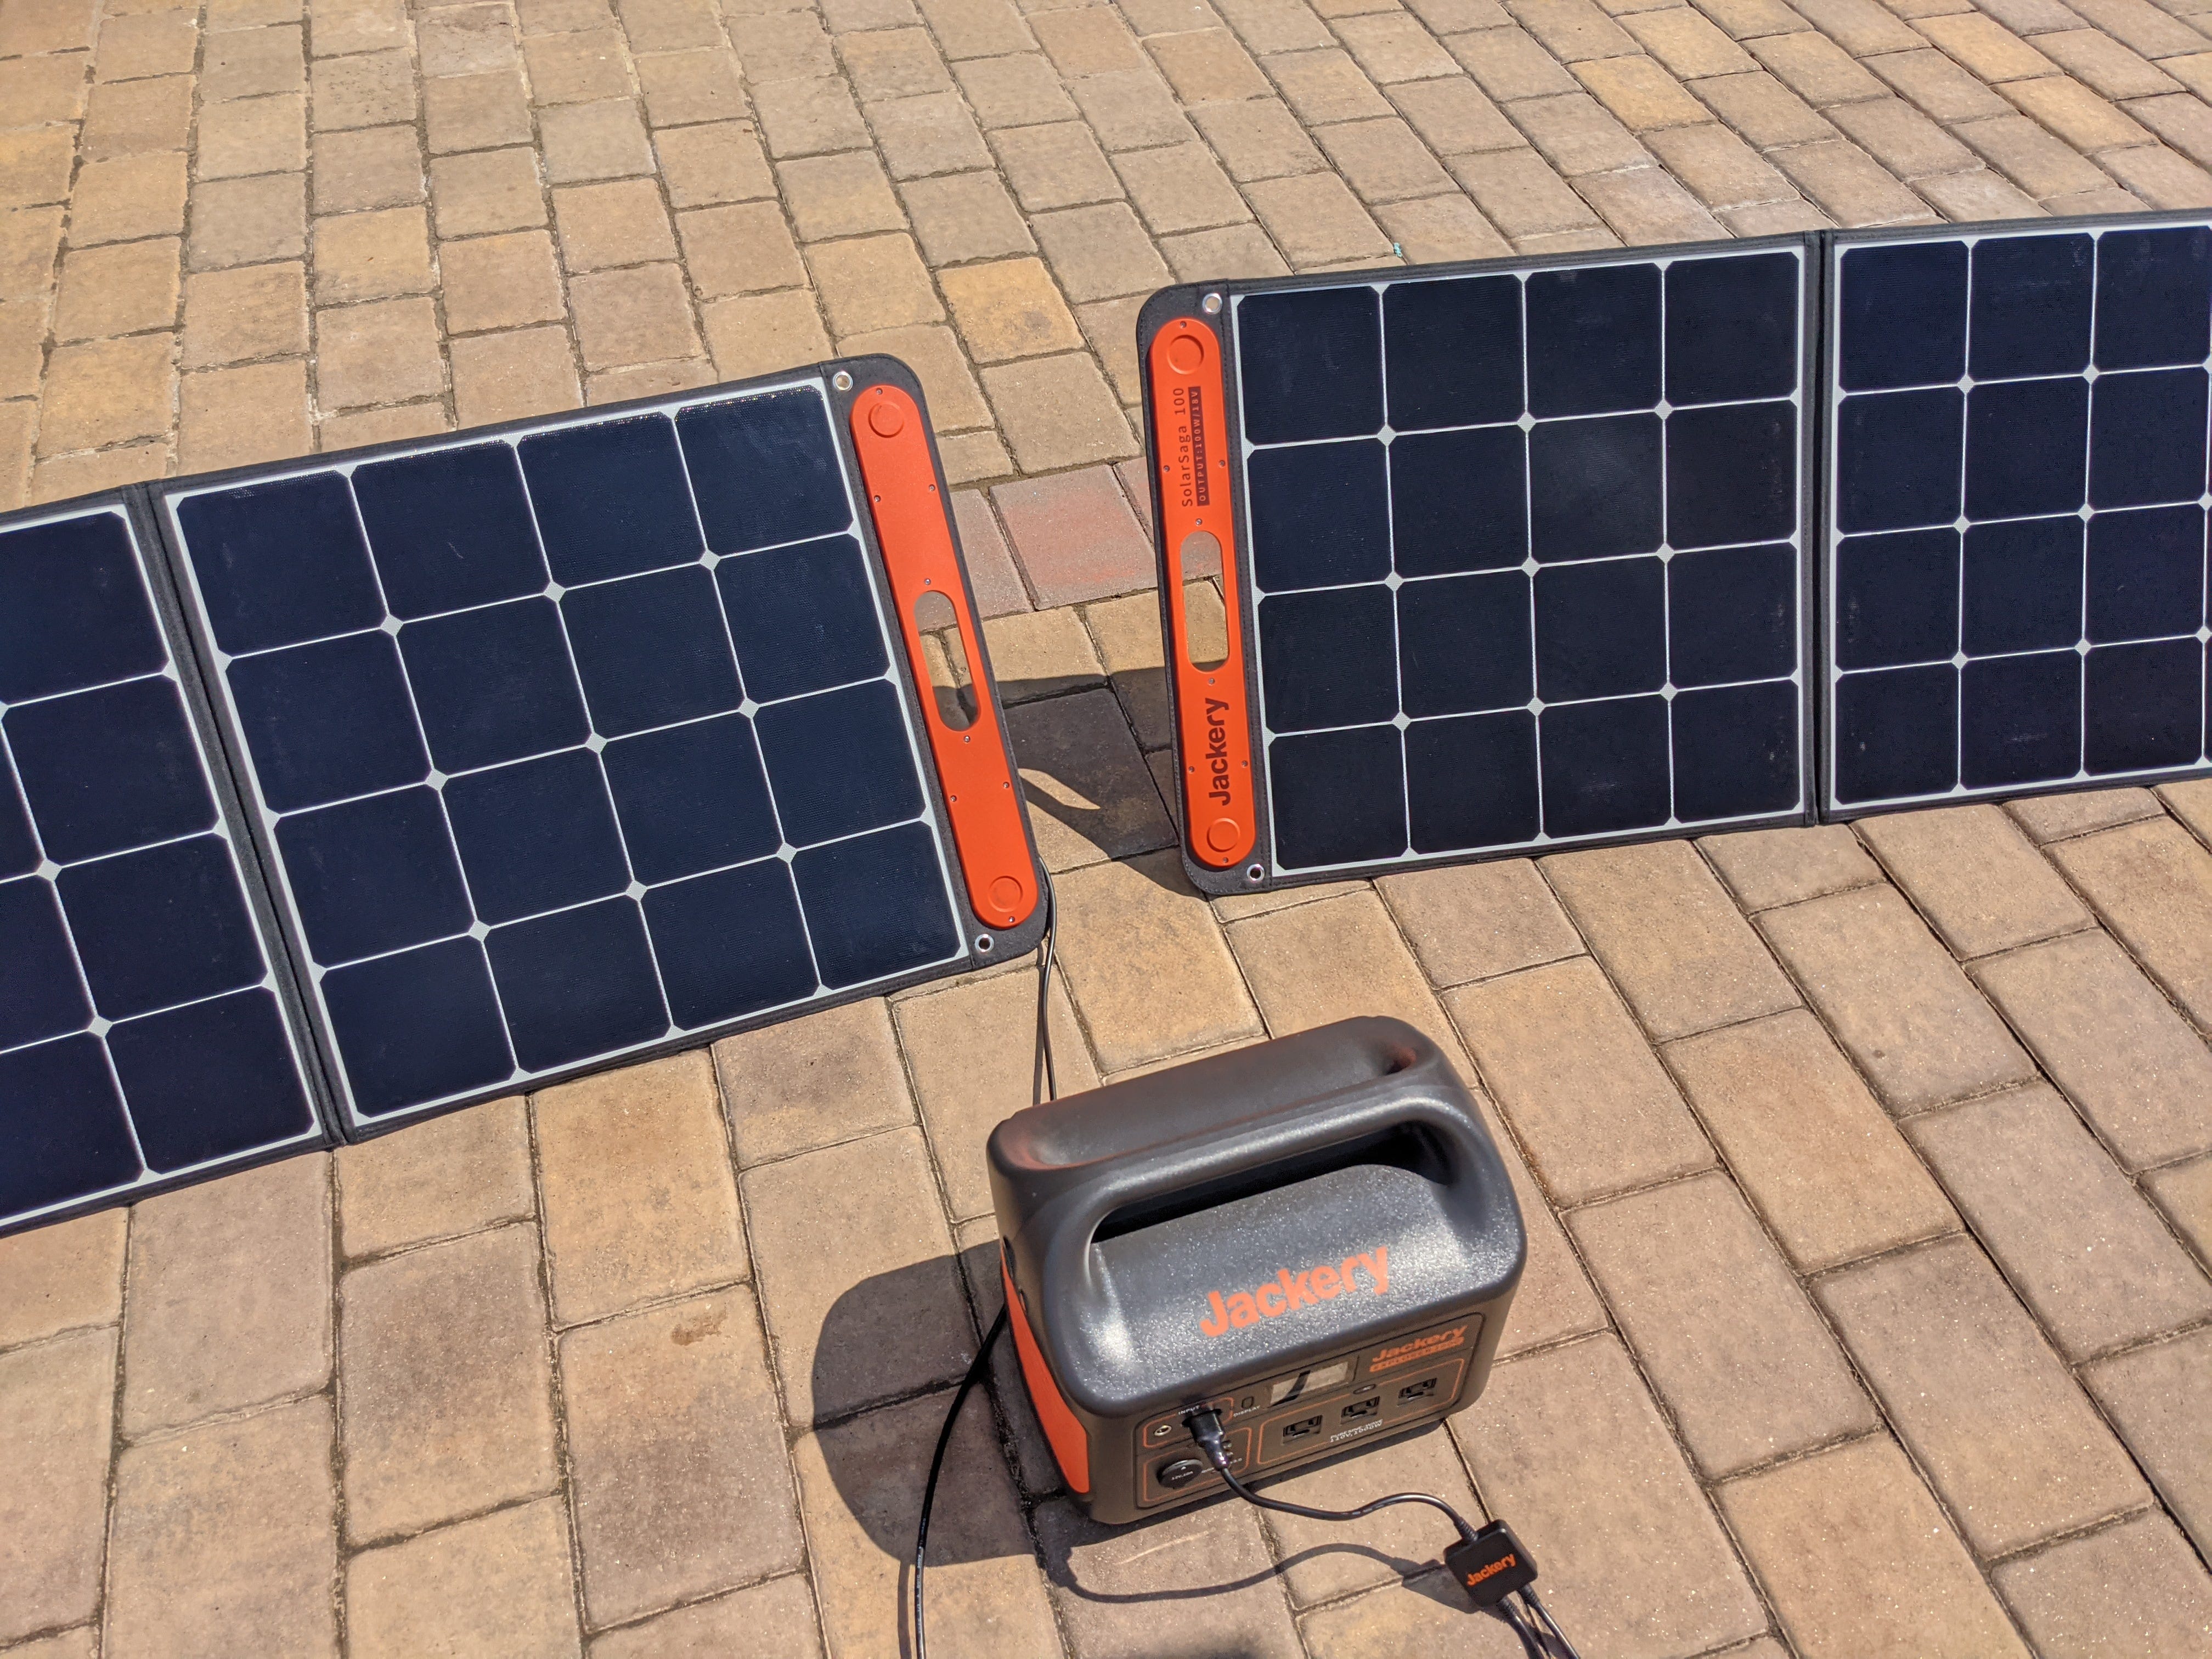 Jackery Explorer 1000W Portable Power Station Review: the new 'ol reliable, by Stefan Etienne